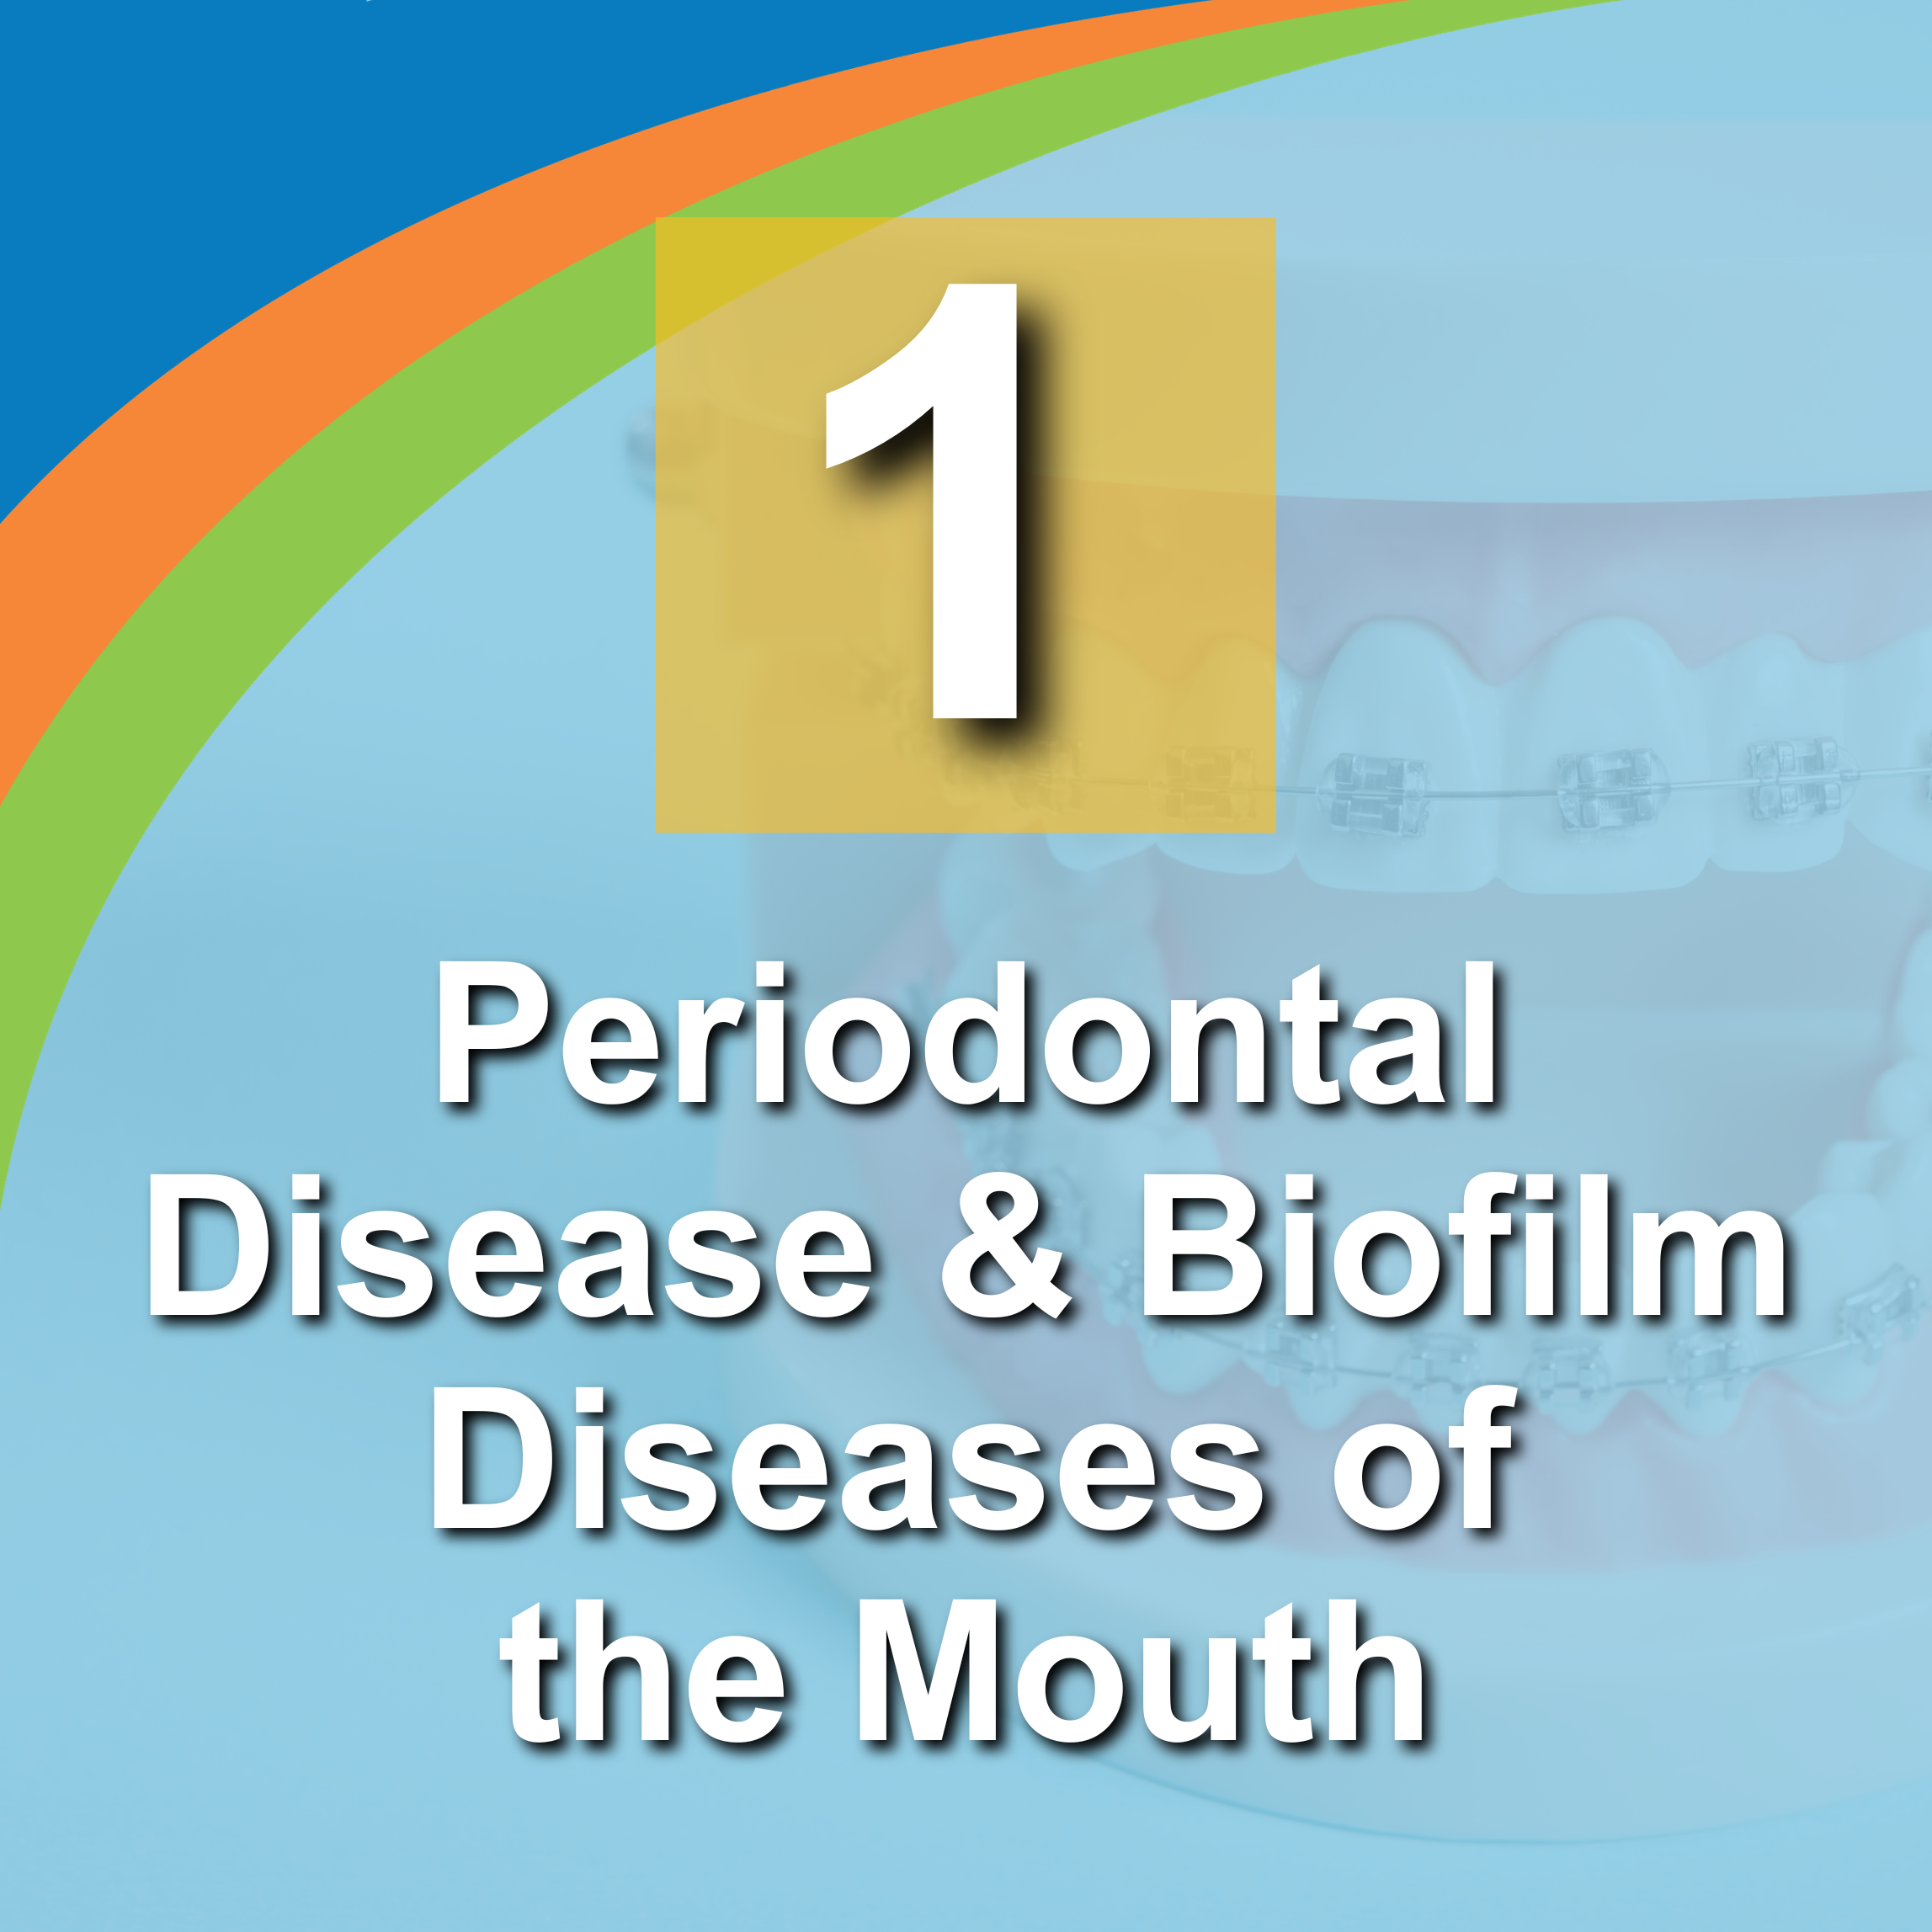 1. Periodontal Disease and Biofilm Diseases of the Mouth